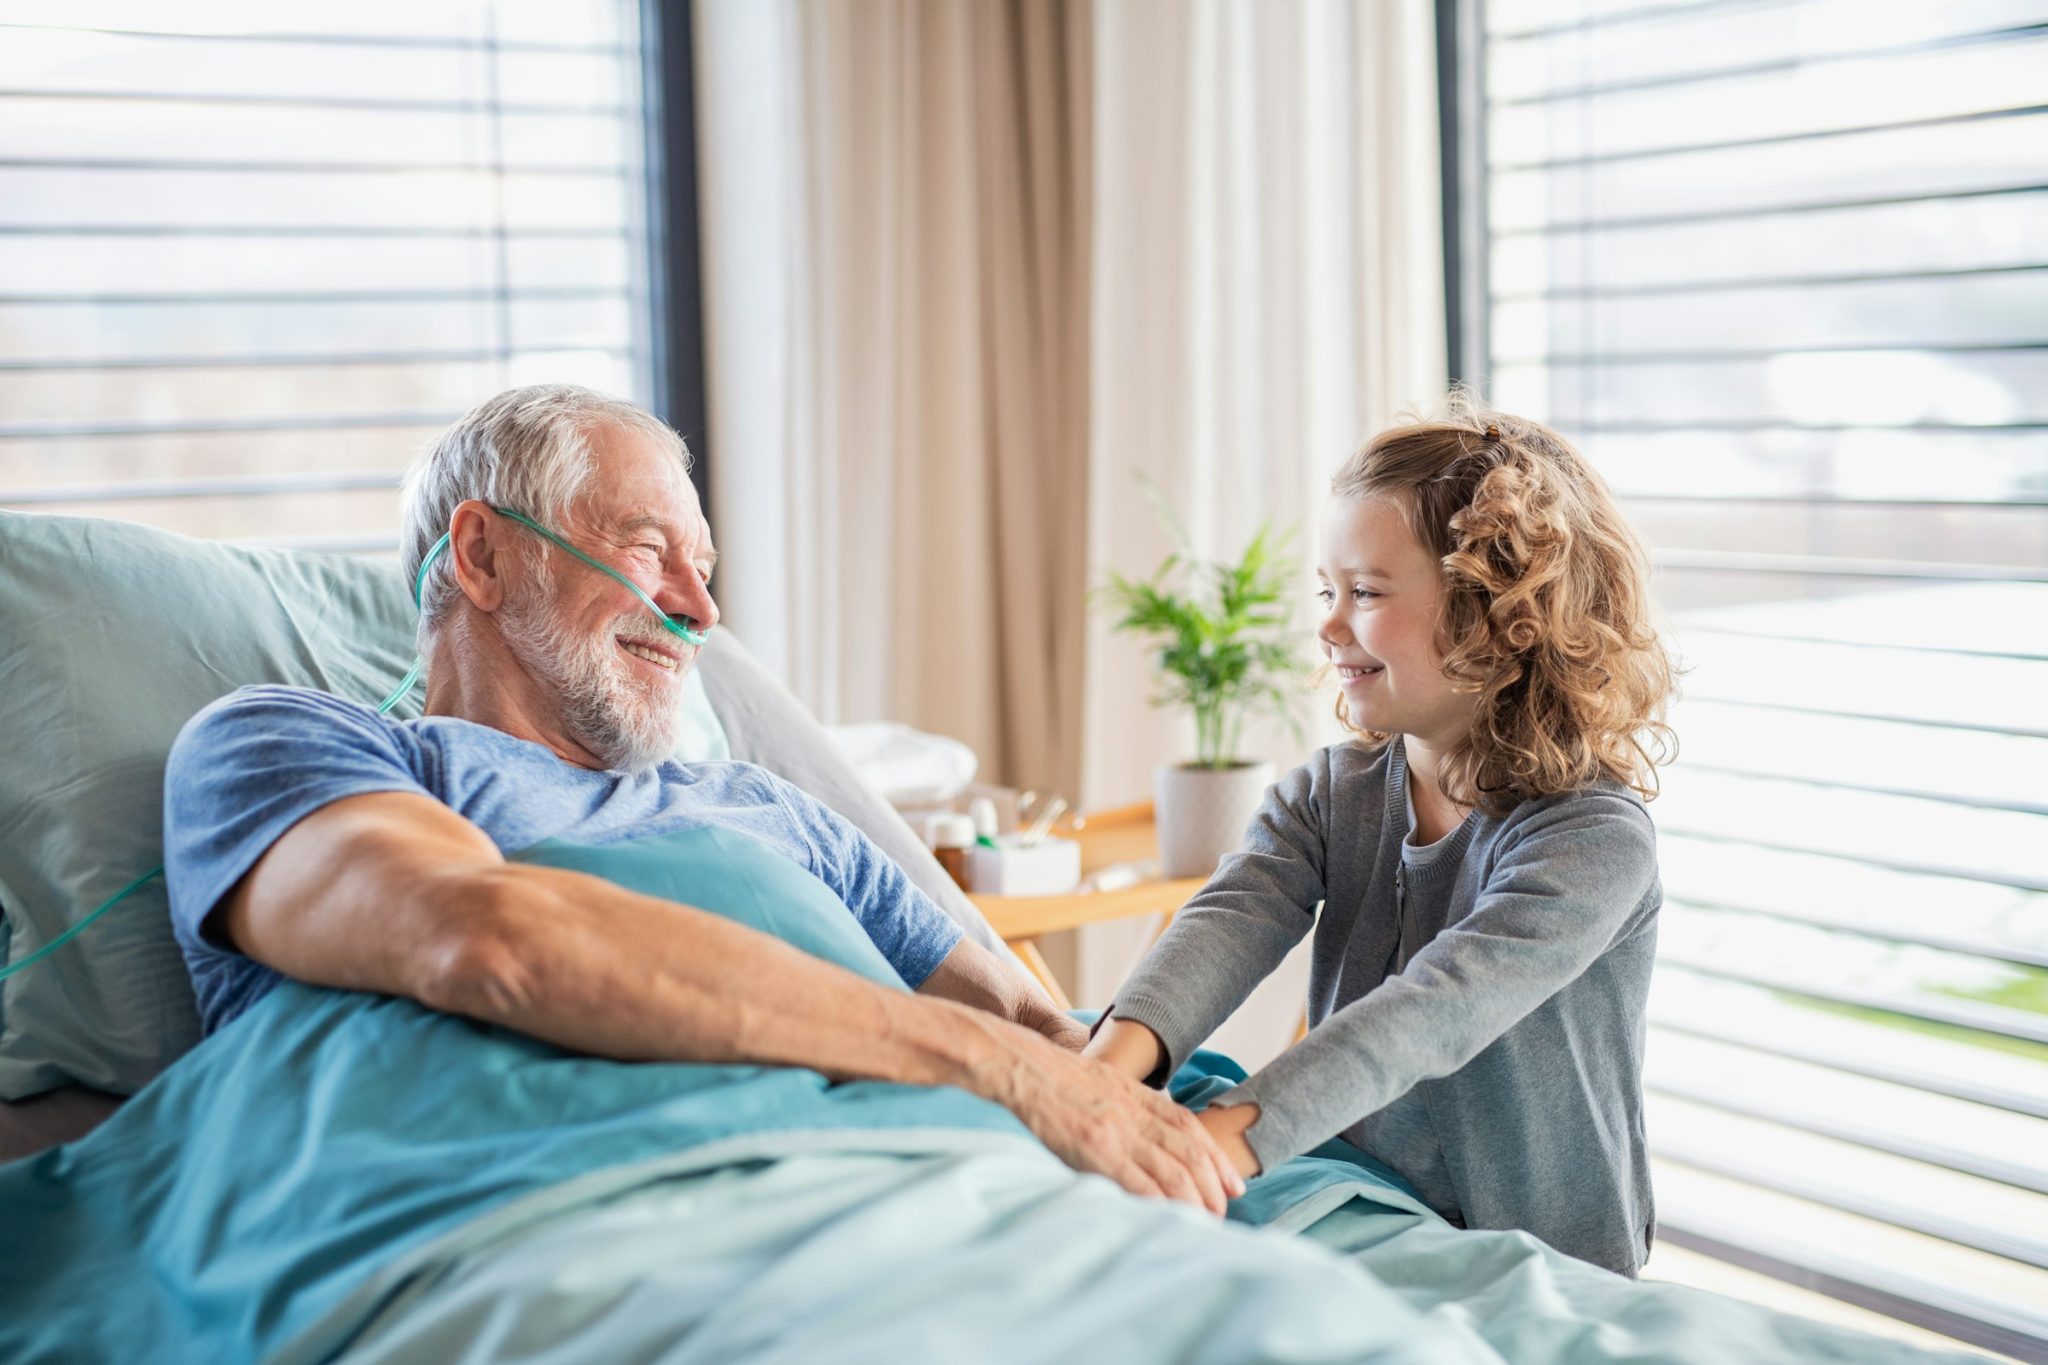 6 patient safety tips for long-term hospital stays